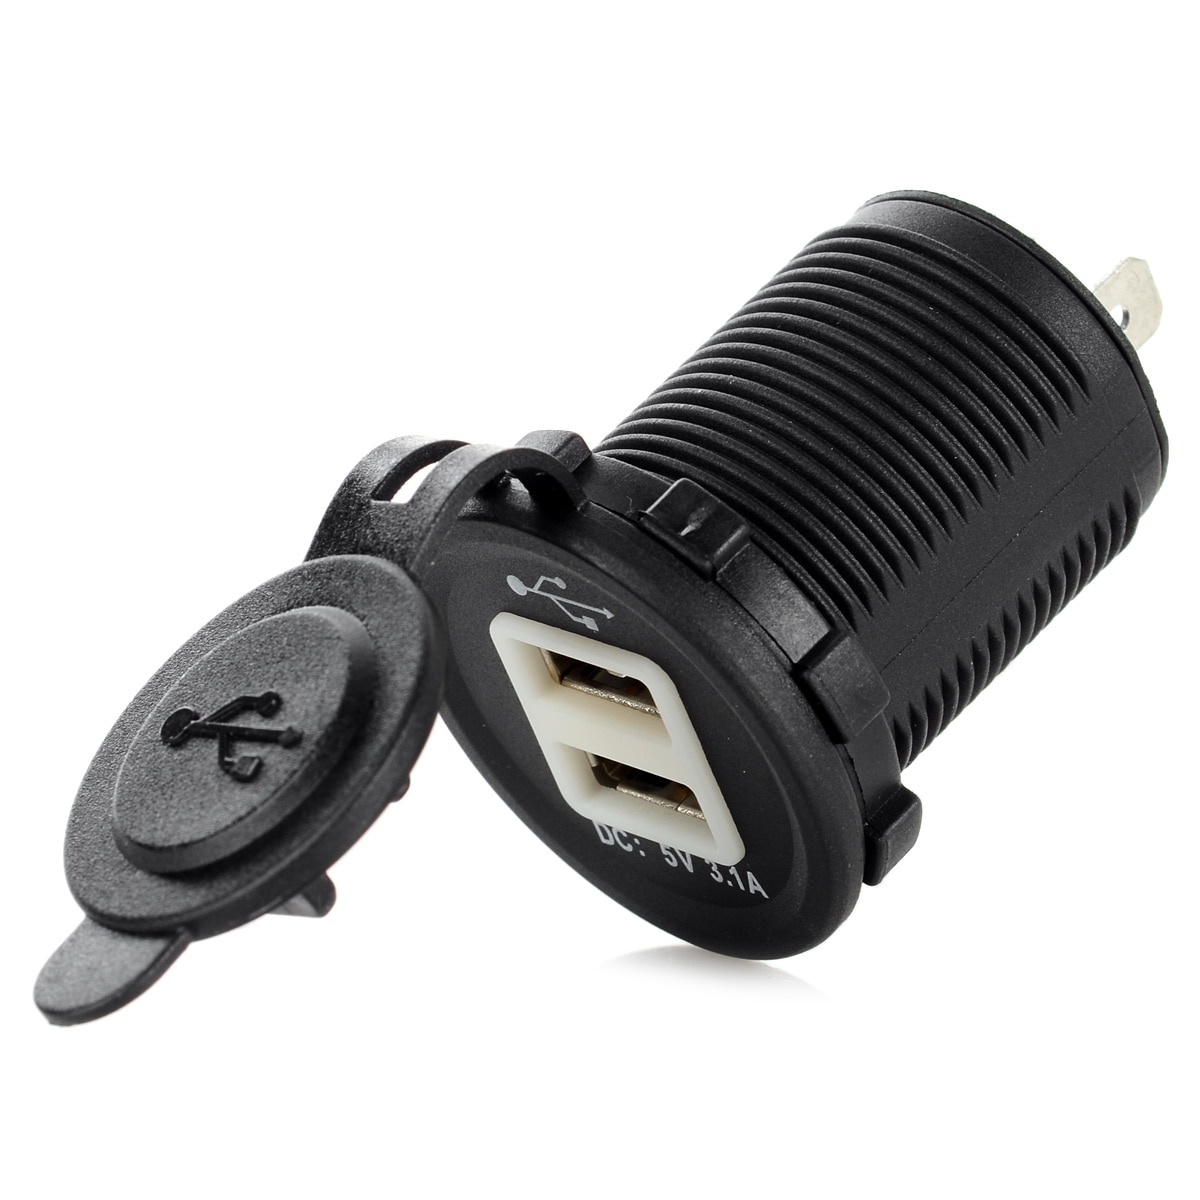 Dc 12 ~ 24V 3.1A Diy Auto Usb Lader Waterbestendig Dual Usb Car Charger Adapter Met Blauw Licht voor Auto Motocylcye Boot